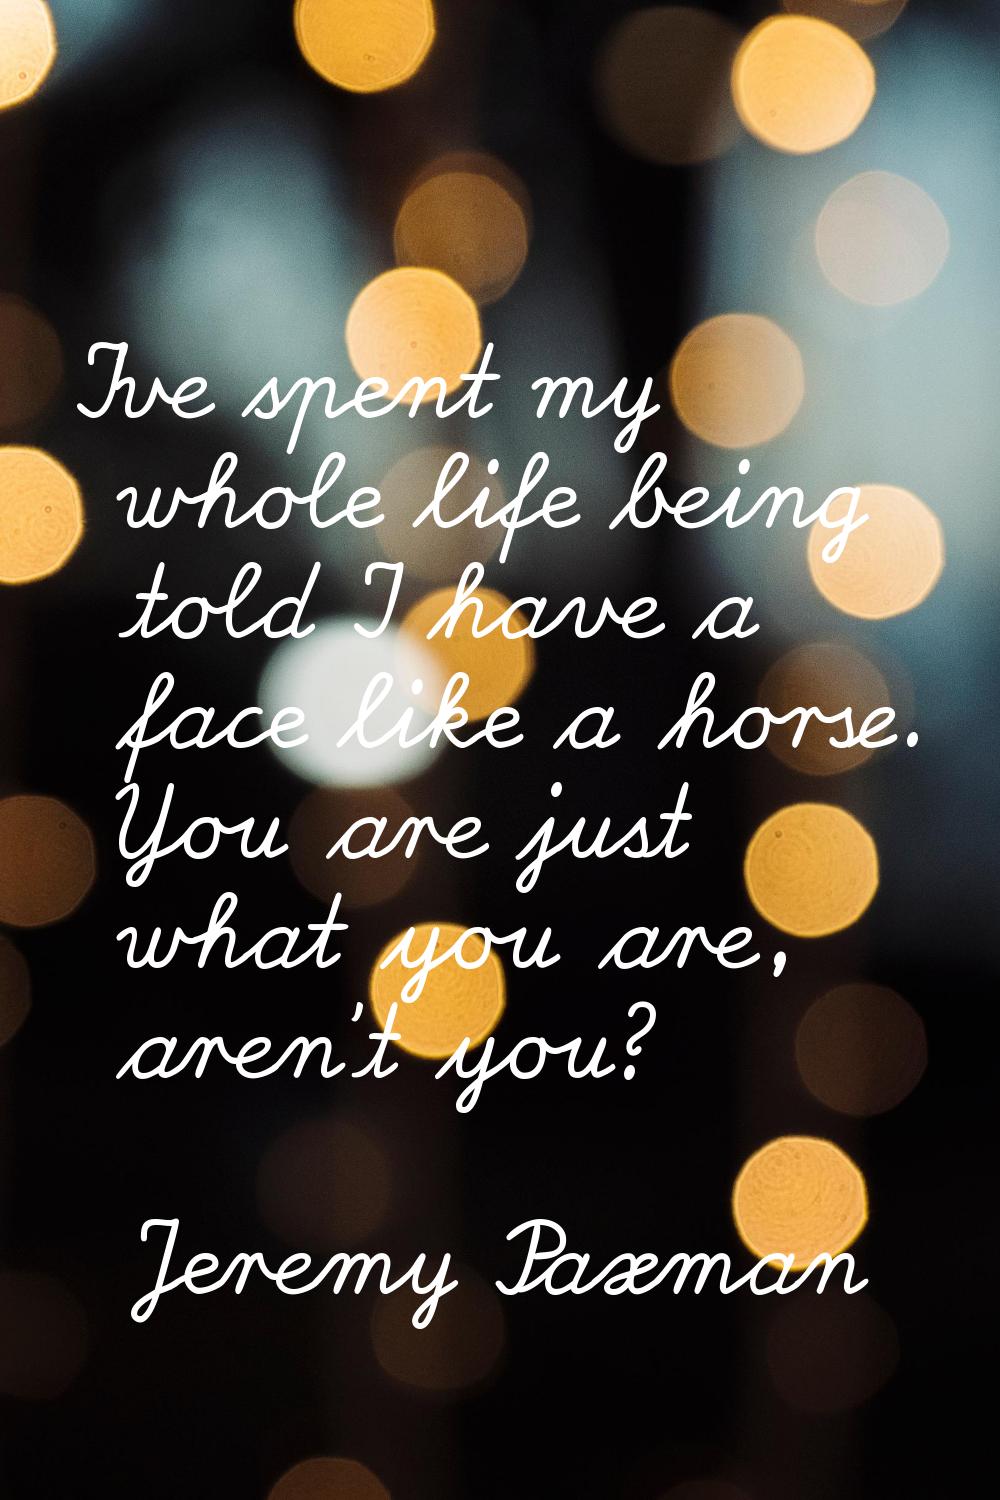 I've spent my whole life being told I have a face like a horse. You are just what you are, aren't y